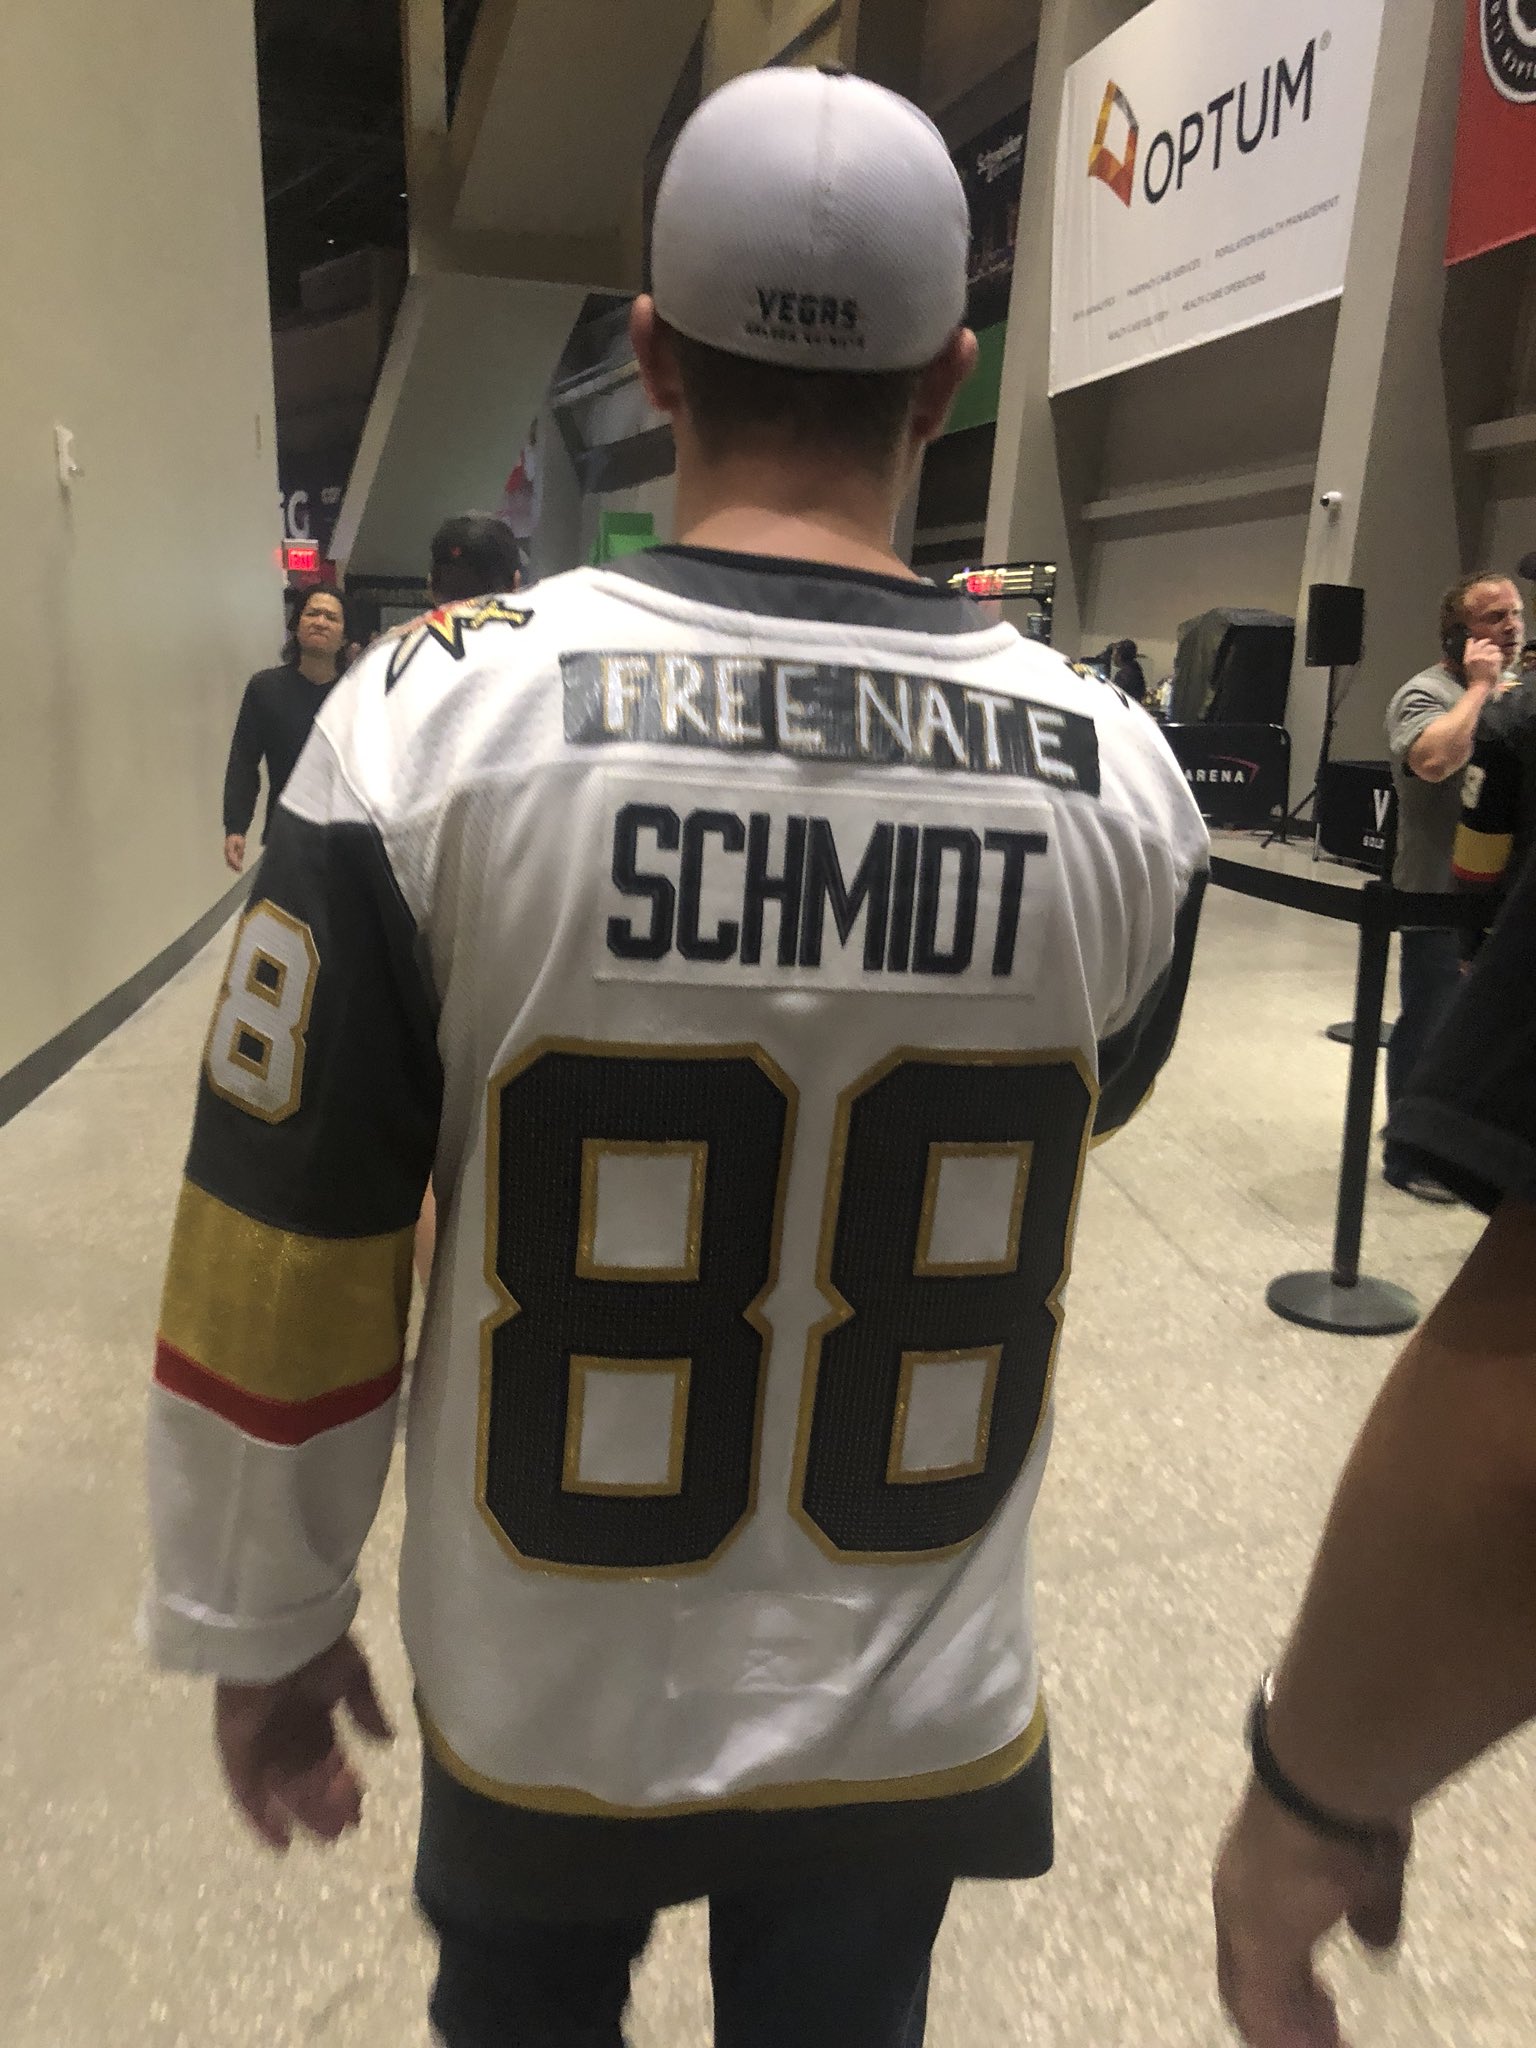 Jeff Eisenband on Twitter: We have a “Free Nate Schmidt” jersey